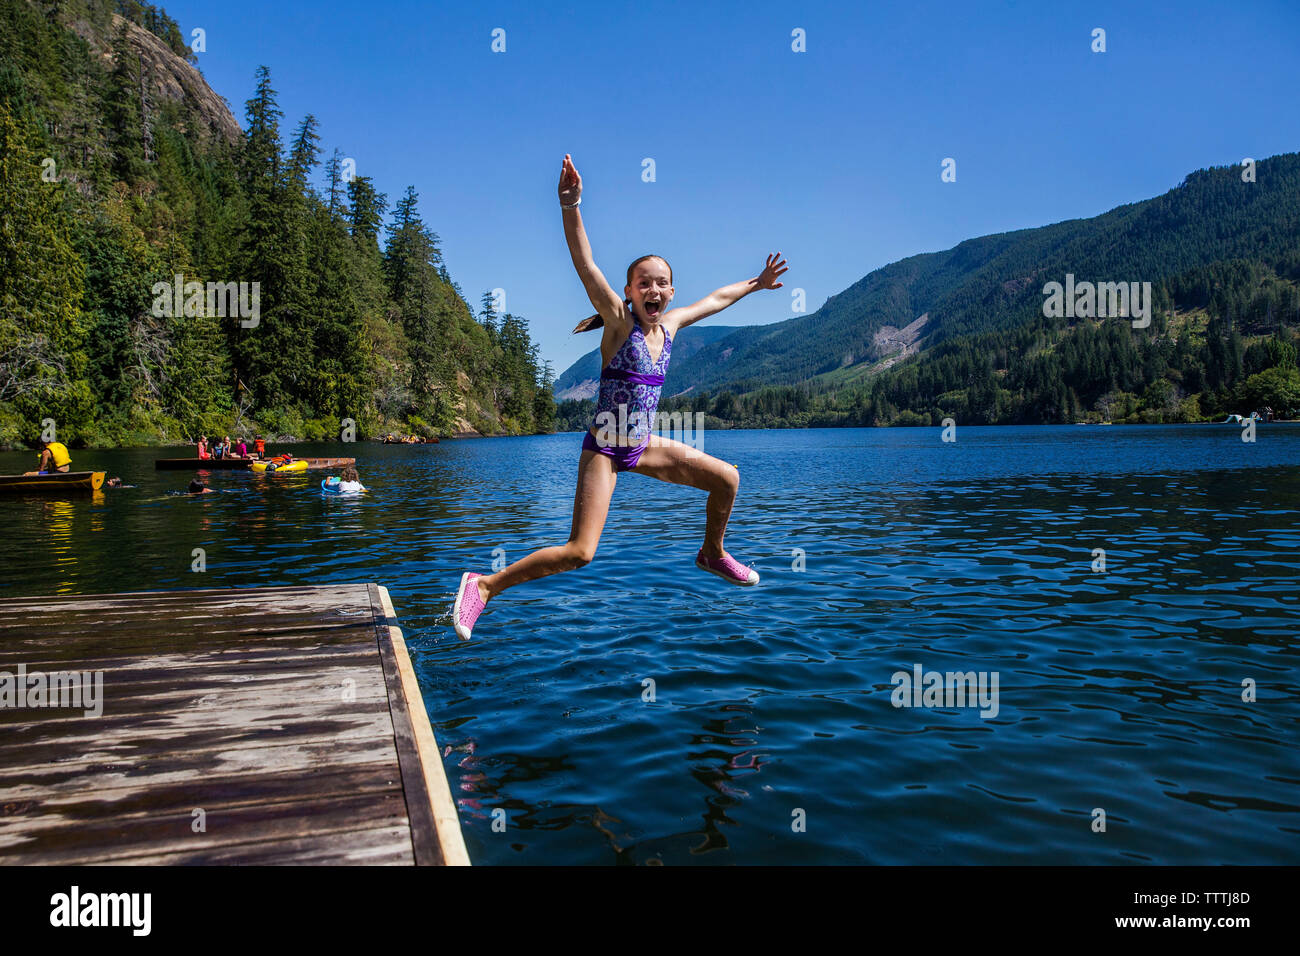 Front view of girl jumping into the lake surrounded by moutains Stock Photo